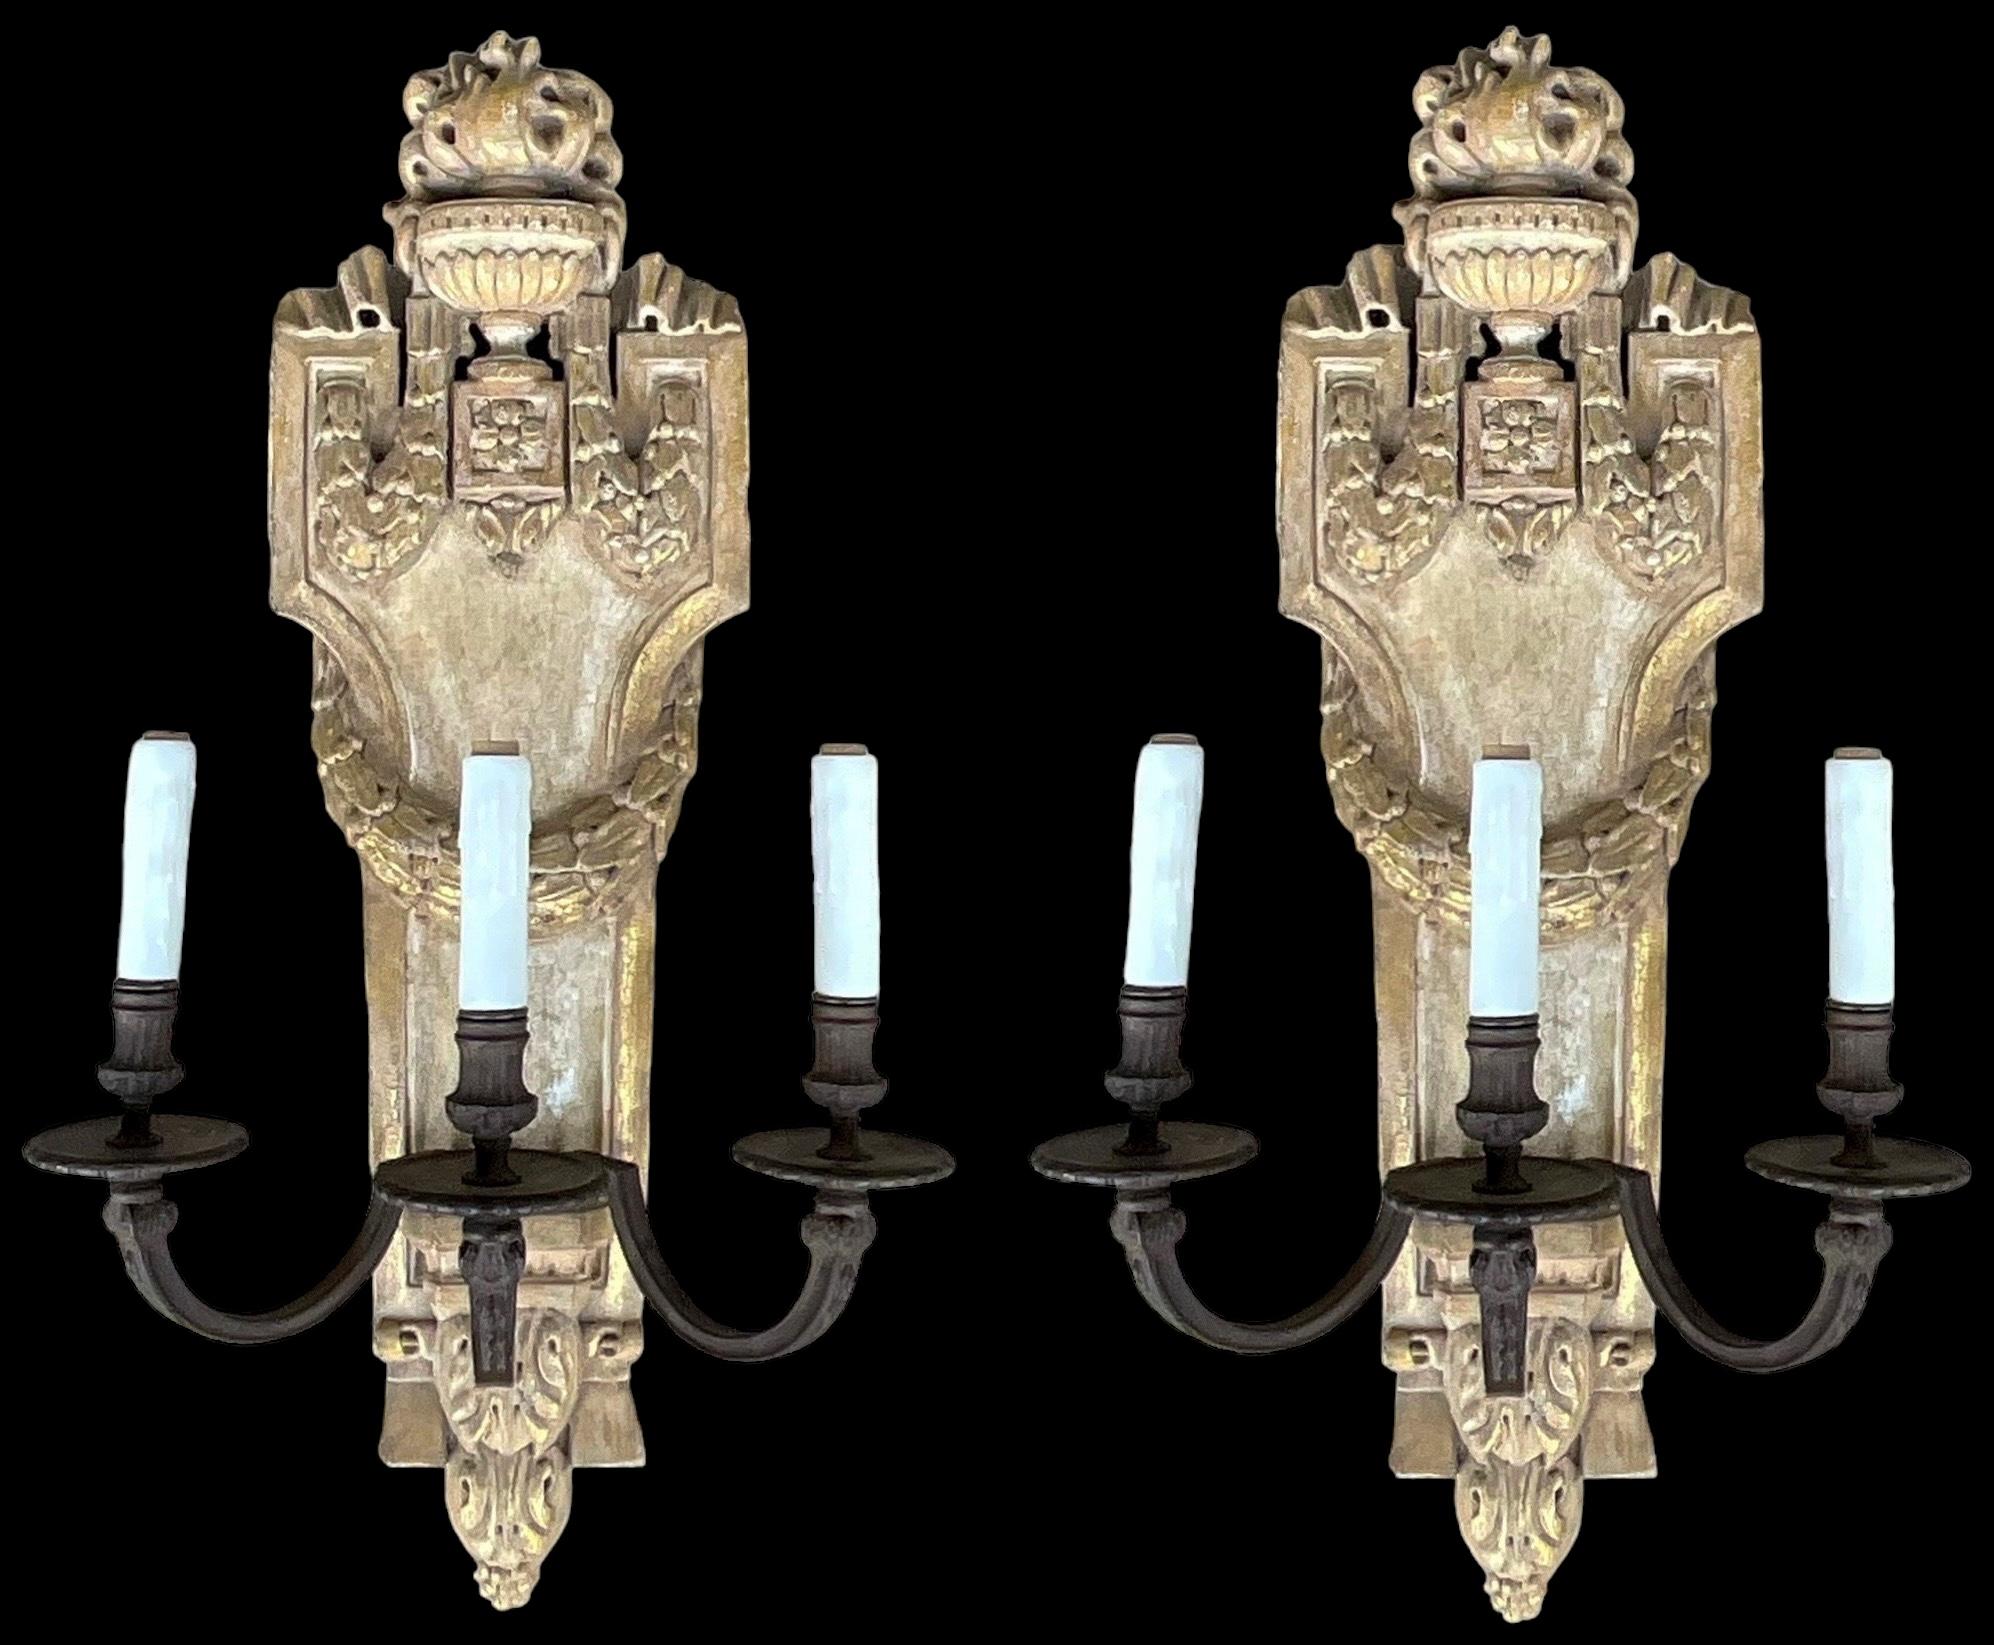 Italian Neo-Classical Style Carved Wood Sconces W/ Urns & Draping Laurel Garland -Pair  For Sale